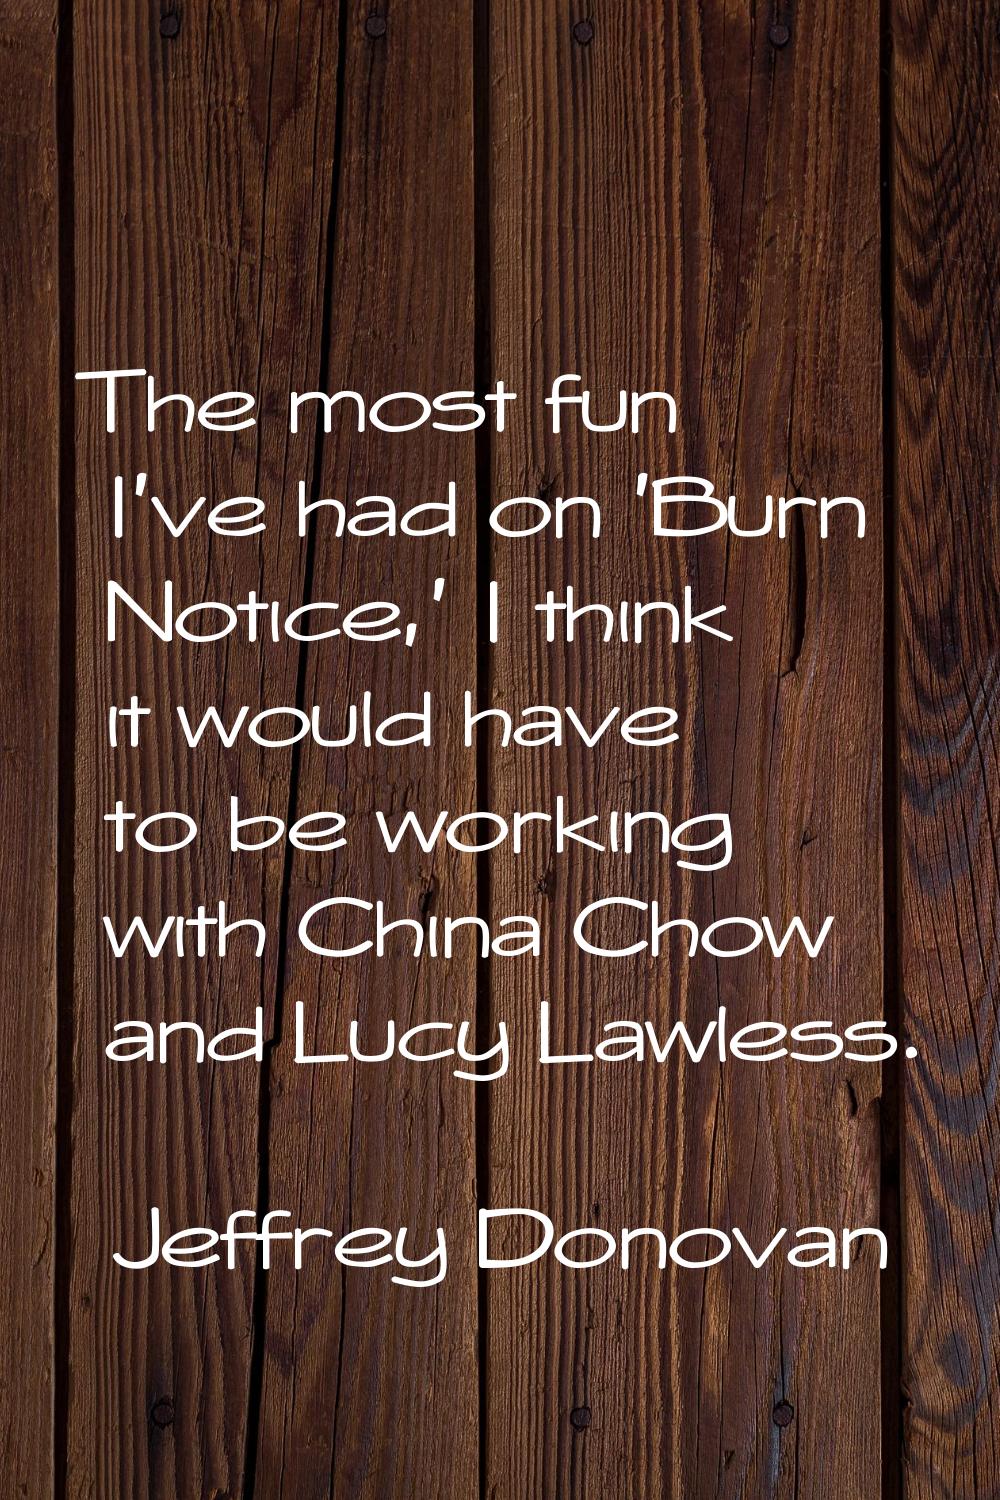 The most fun I've had on 'Burn Notice,' I think it would have to be working with China Chow and Luc